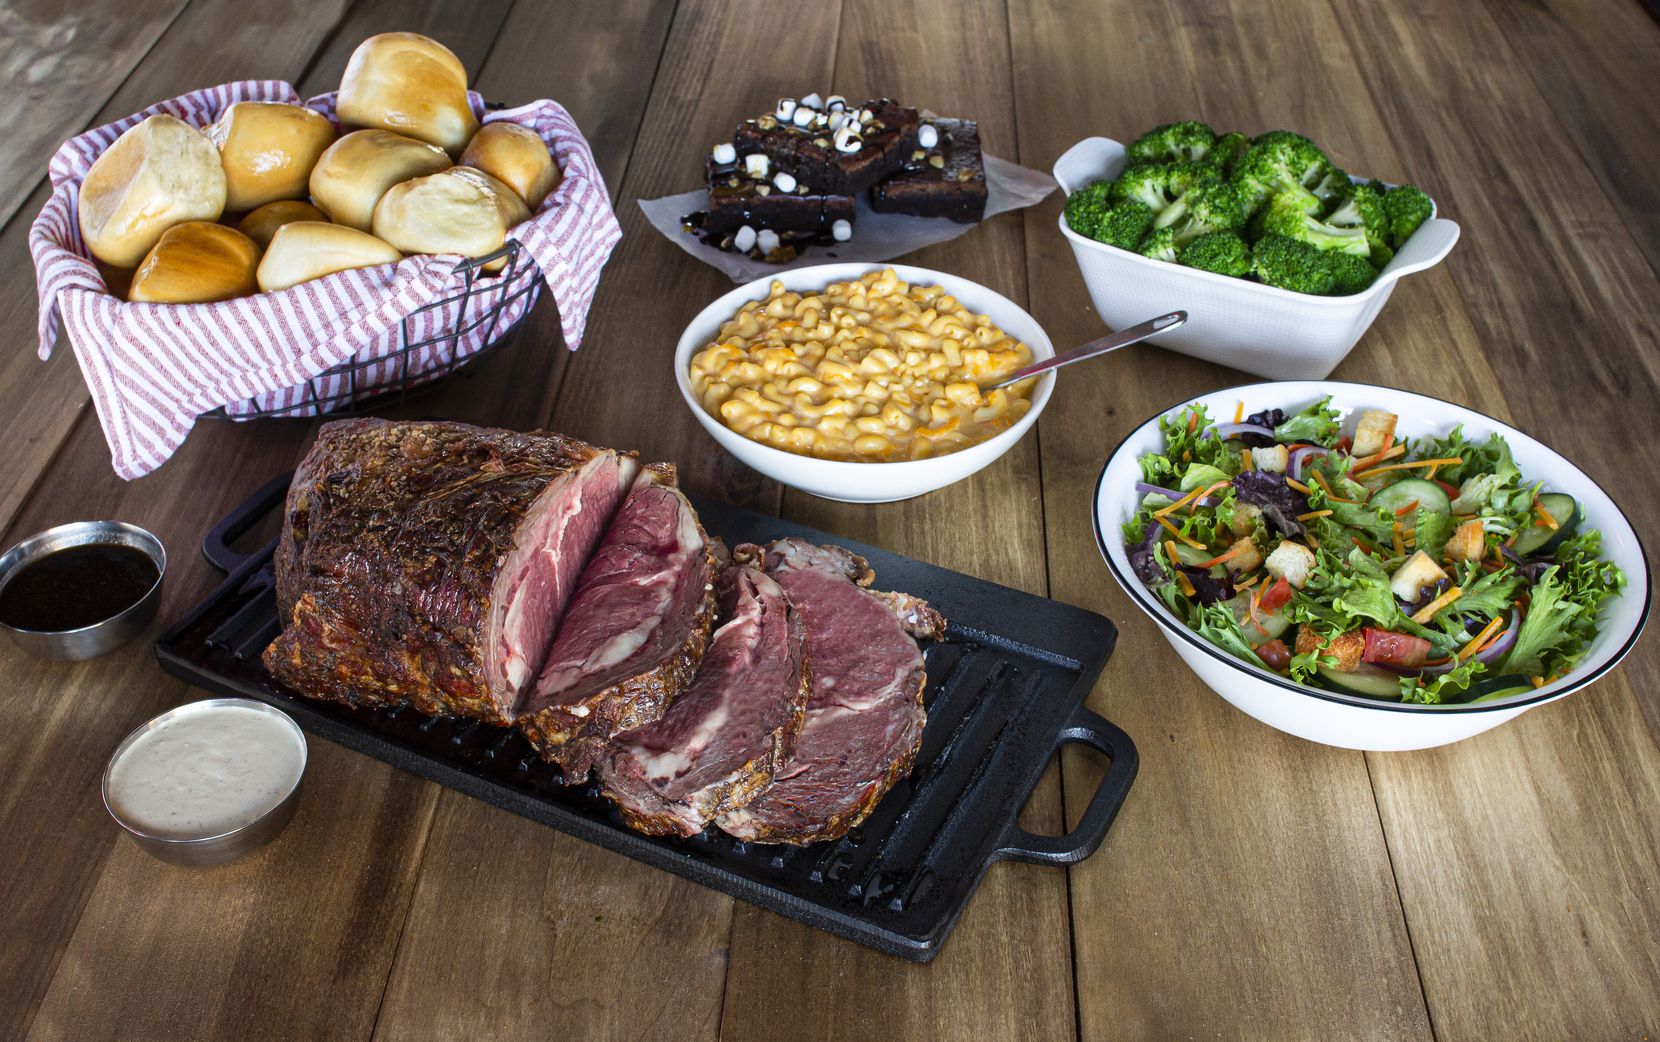 Logan's Roadhouse's Ultimate Holiday Feast includes a choice of meat like prime rib, house...